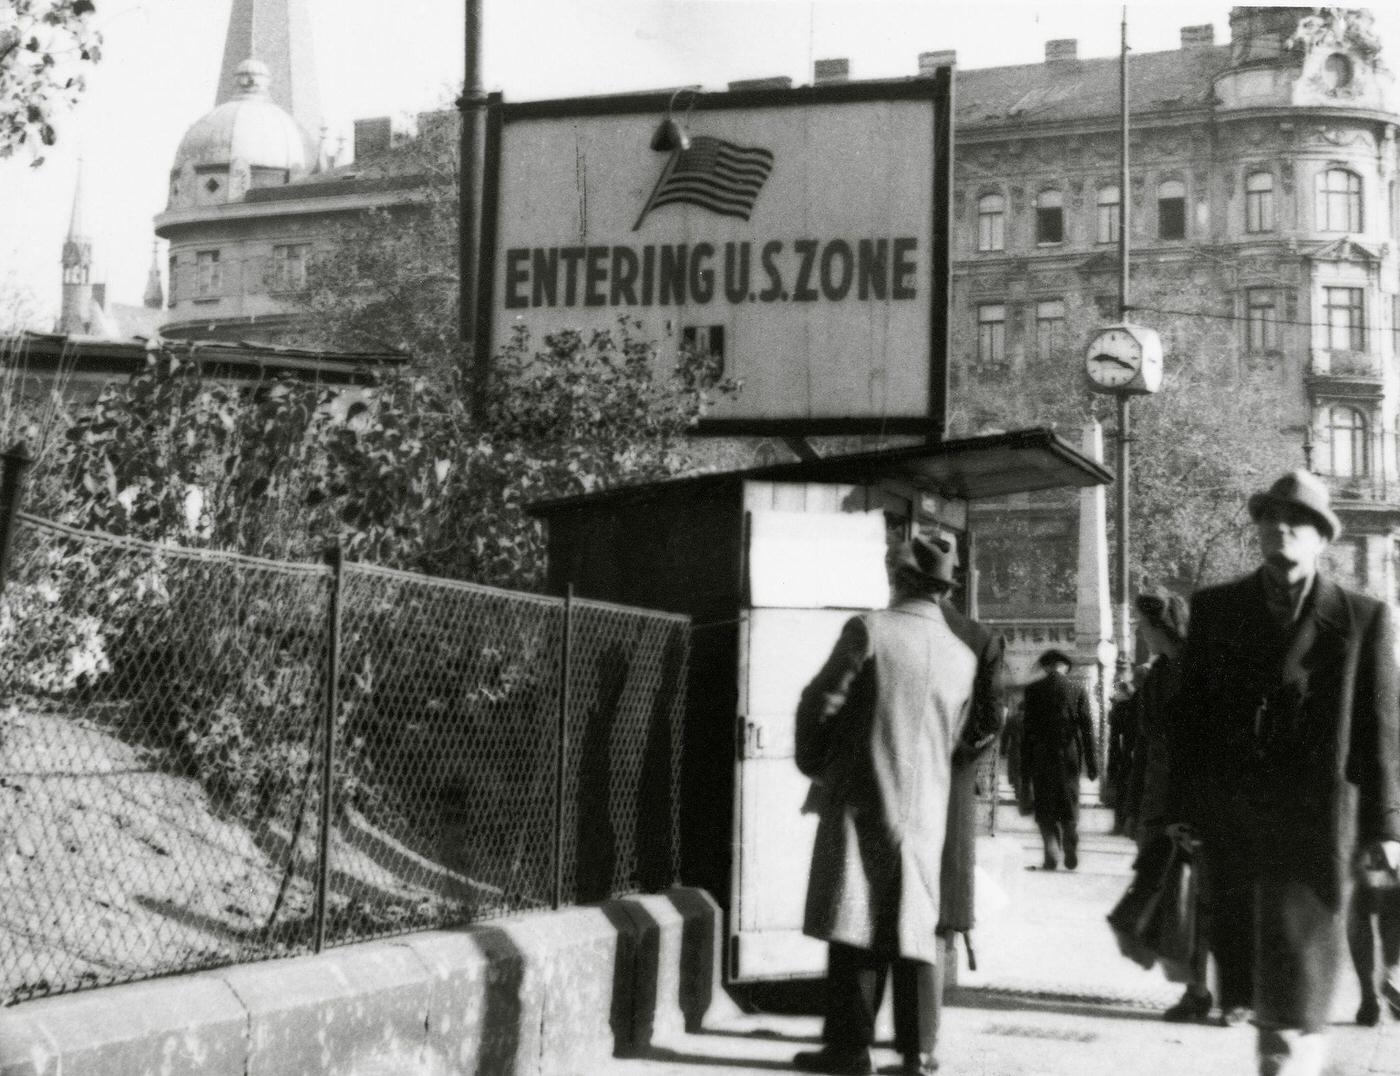 Entrance to the US zone of Vienna after World War II, which was divided into four zones controlled by the allied forces.